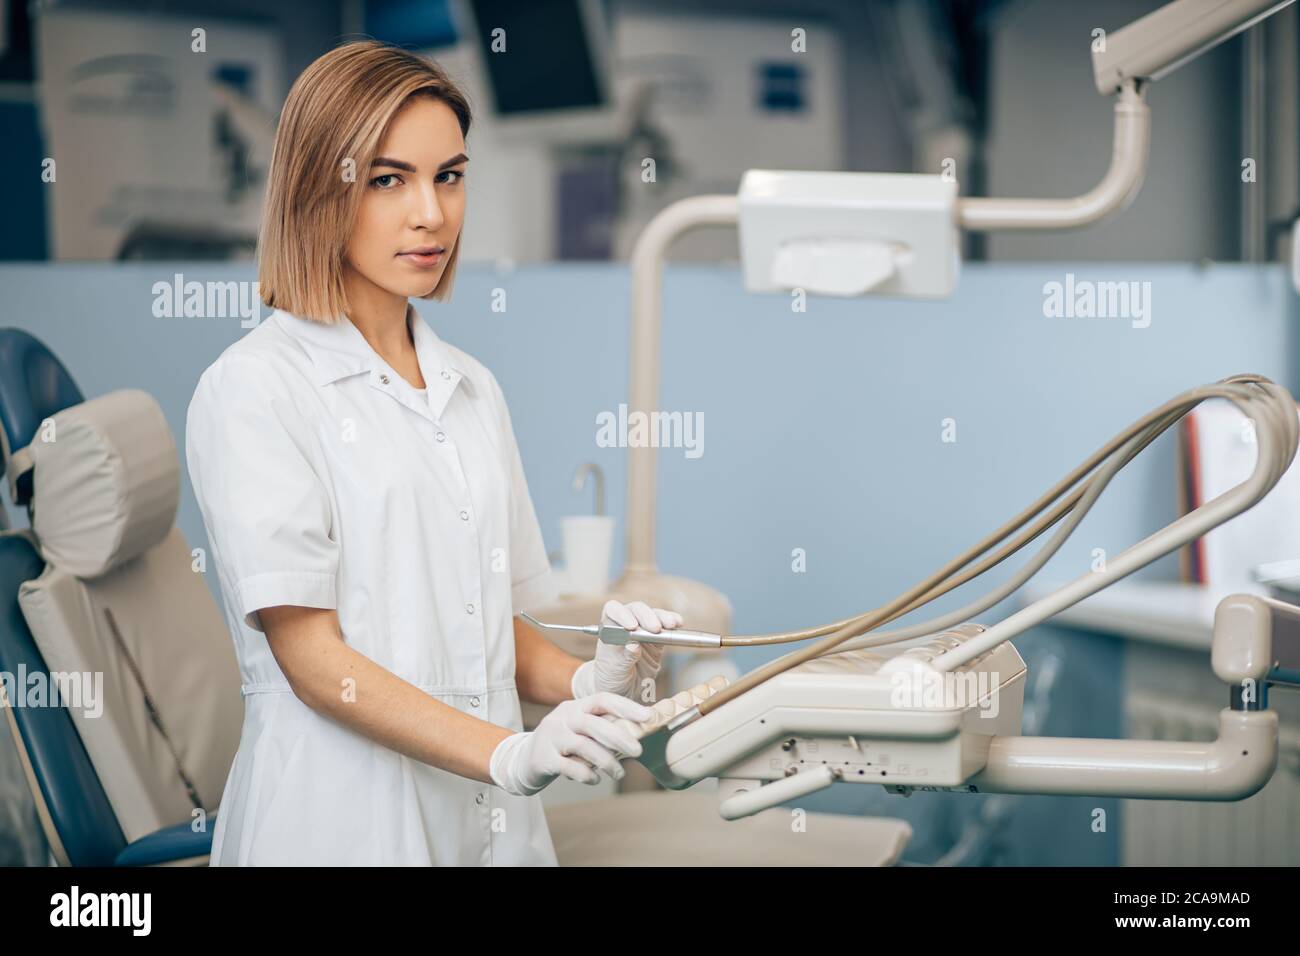 serious young dentist woman at work, use special instrument equipment for teeth treatment, look at camera, health care provider Stock Photo